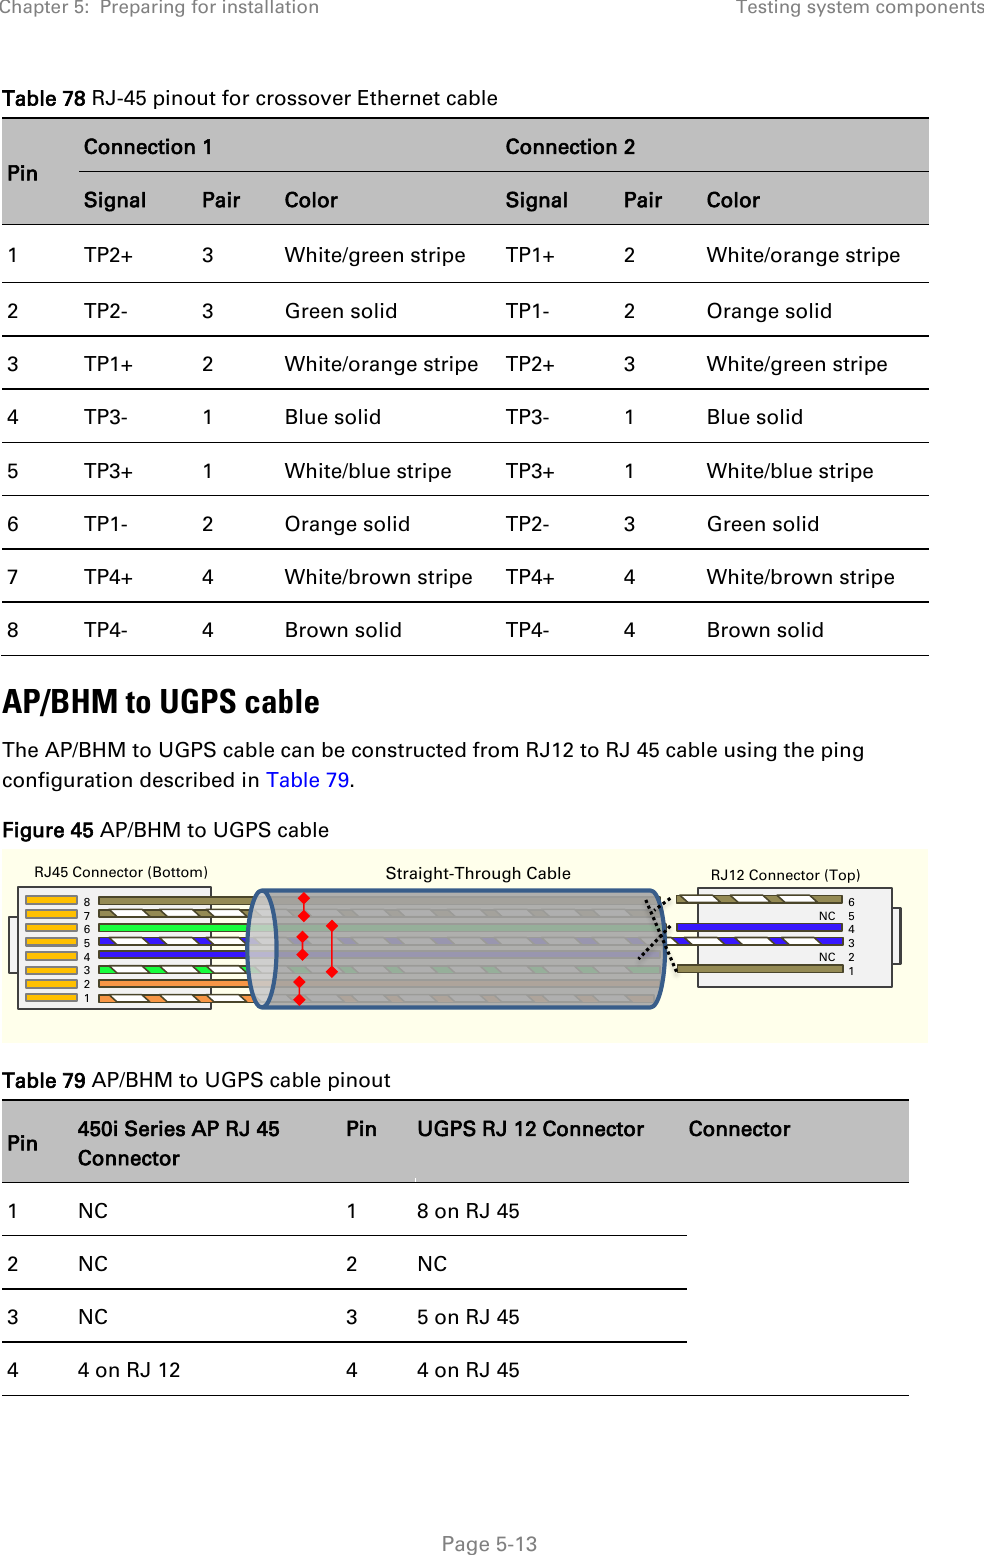 Chapter 5:  Preparing for installation Testing system components   Page 5-13 Table 78 RJ-45 pinout for crossover Ethernet cable Pin Connection 1 Connection 2 Signal Pair Color Signal Pair Color 1 TP2+ 3 White/green stripe TP1+ 2 White/orange stripe 2 TP2- 3 Green solid TP1- 2 Orange solid 3 TP1+ 2 White/orange stripe TP2+ 3 White/green stripe 4 TP3- 1 Blue solid TP3- 1 Blue solid 5 TP3+ 1 White/blue stripe TP3+ 1 White/blue stripe 6 TP1- 2 Orange solid TP2- 3 Green solid 7 TP4+ 4 White/brown stripe TP4+ 4 White/brown stripe 8 TP4- 4 Brown solid TP4- 4 Brown solid AP/BHM to UGPS cable The AP/BHM to UGPS cable can be constructed from RJ12 to RJ 45 cable using the ping configuration described in Table 79. Figure 45 AP/BHM to UGPS cable   Table 79 AP/BHM to UGPS cable pinout Pin 450i Series AP RJ 45 Connector Pin UGPS RJ 12 Connector Connector 1 NC 1 8 on RJ 45 2 NC 2 NC 3 NC 3 5 on RJ 45 4 4 on RJ 12 4 4 on RJ 45 `` RJ45 Connector (Bottom) Straight-Through Cable  RJ12 Connector (Top) 6 NC    5 4 3 NC    2 1 8     7 6 5 4 3 2 1  